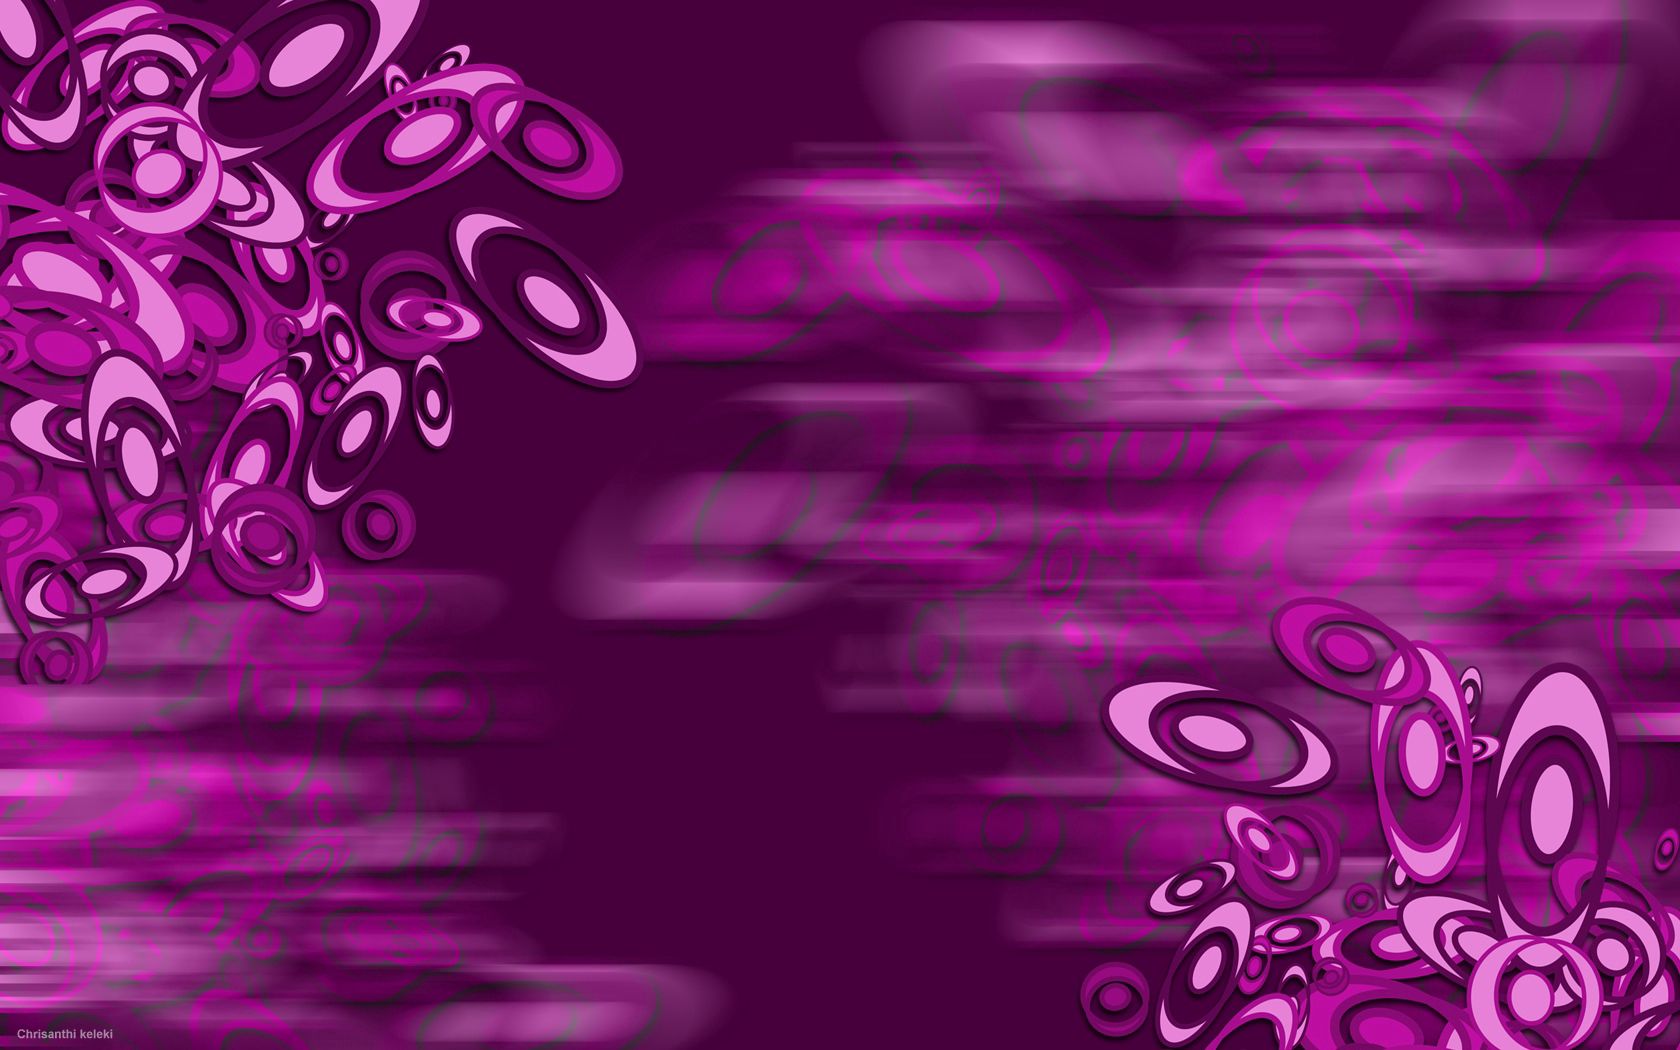 pattern, abstract, lilac, violet, picture, drawing, purple Image for desktop